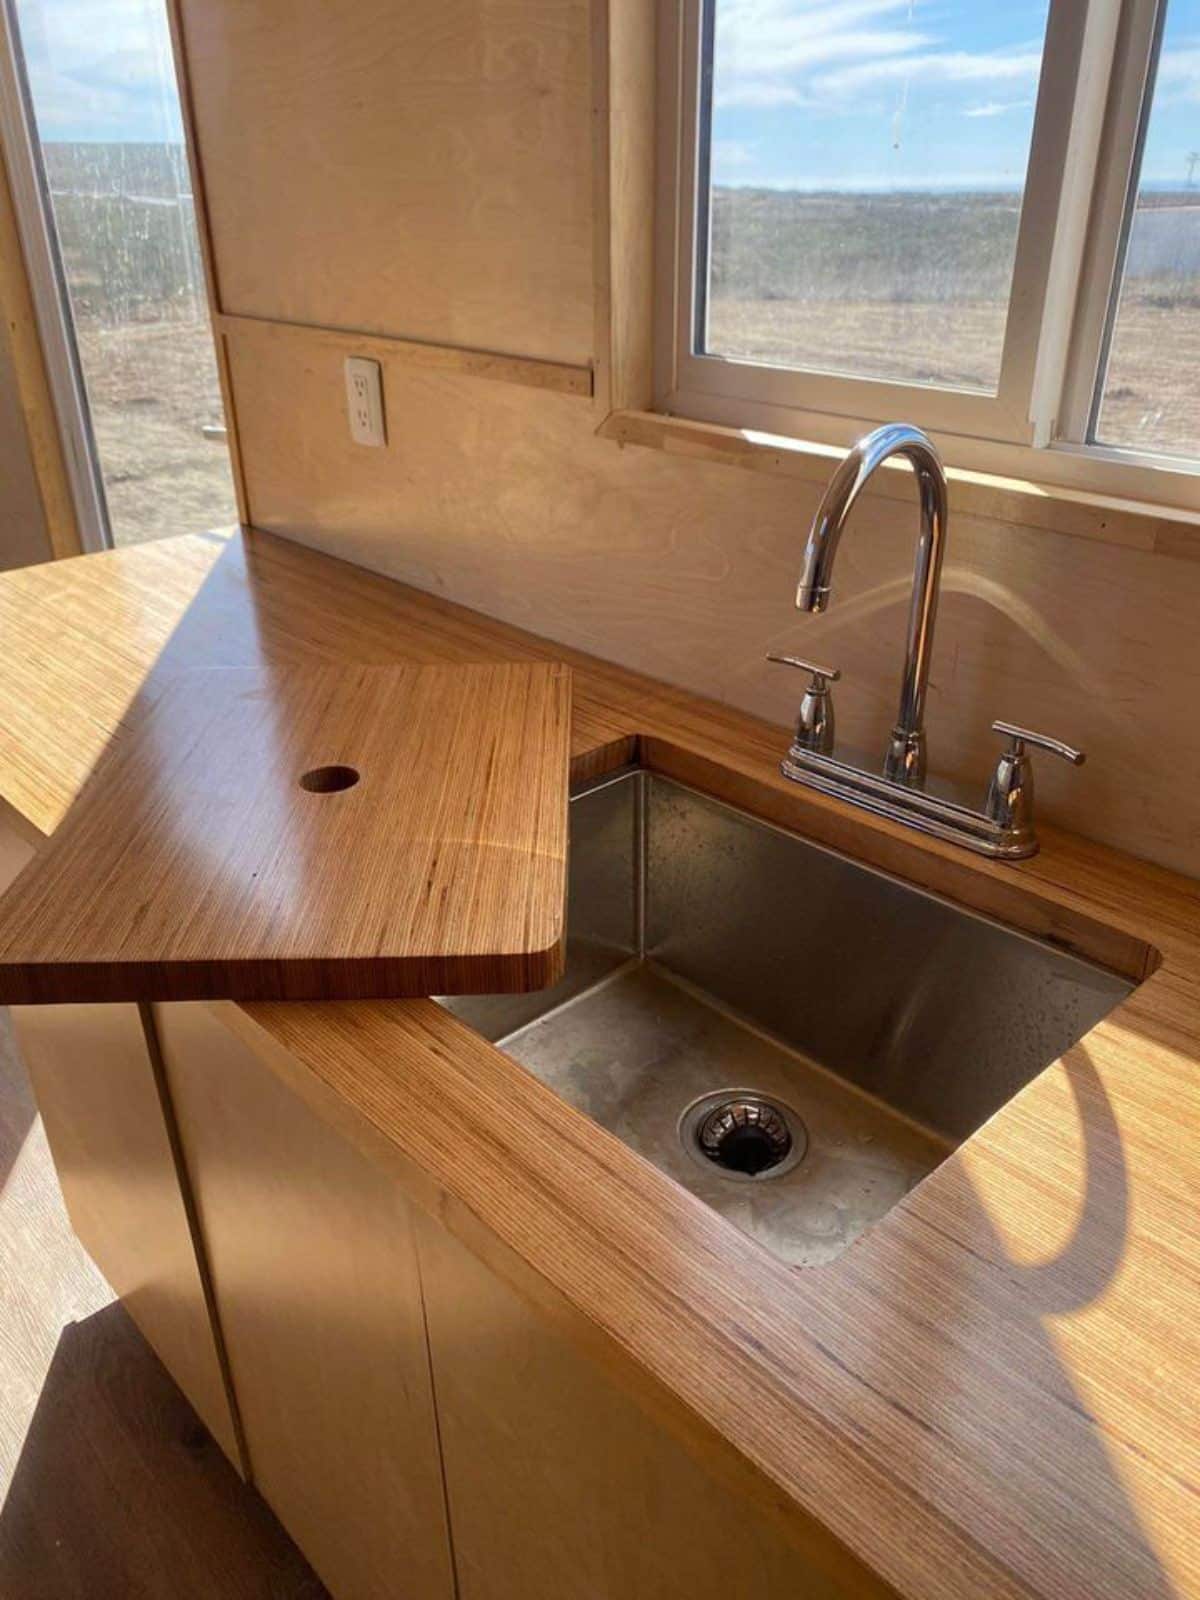 Sink with wooden cover lid